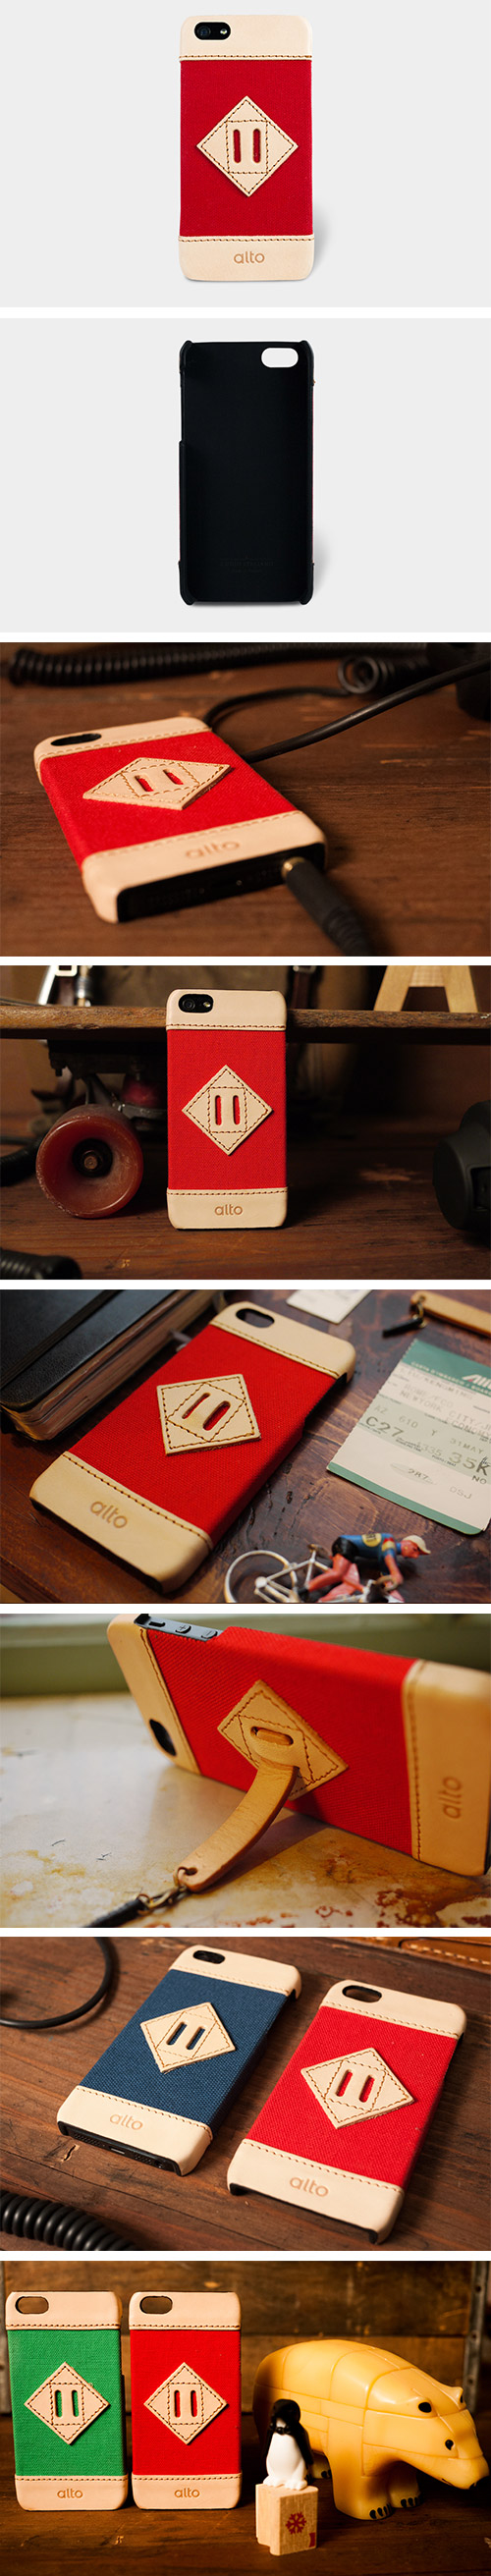 alto iPhone 5 / 5S / SE 真皮手機套 Scapa (Red)